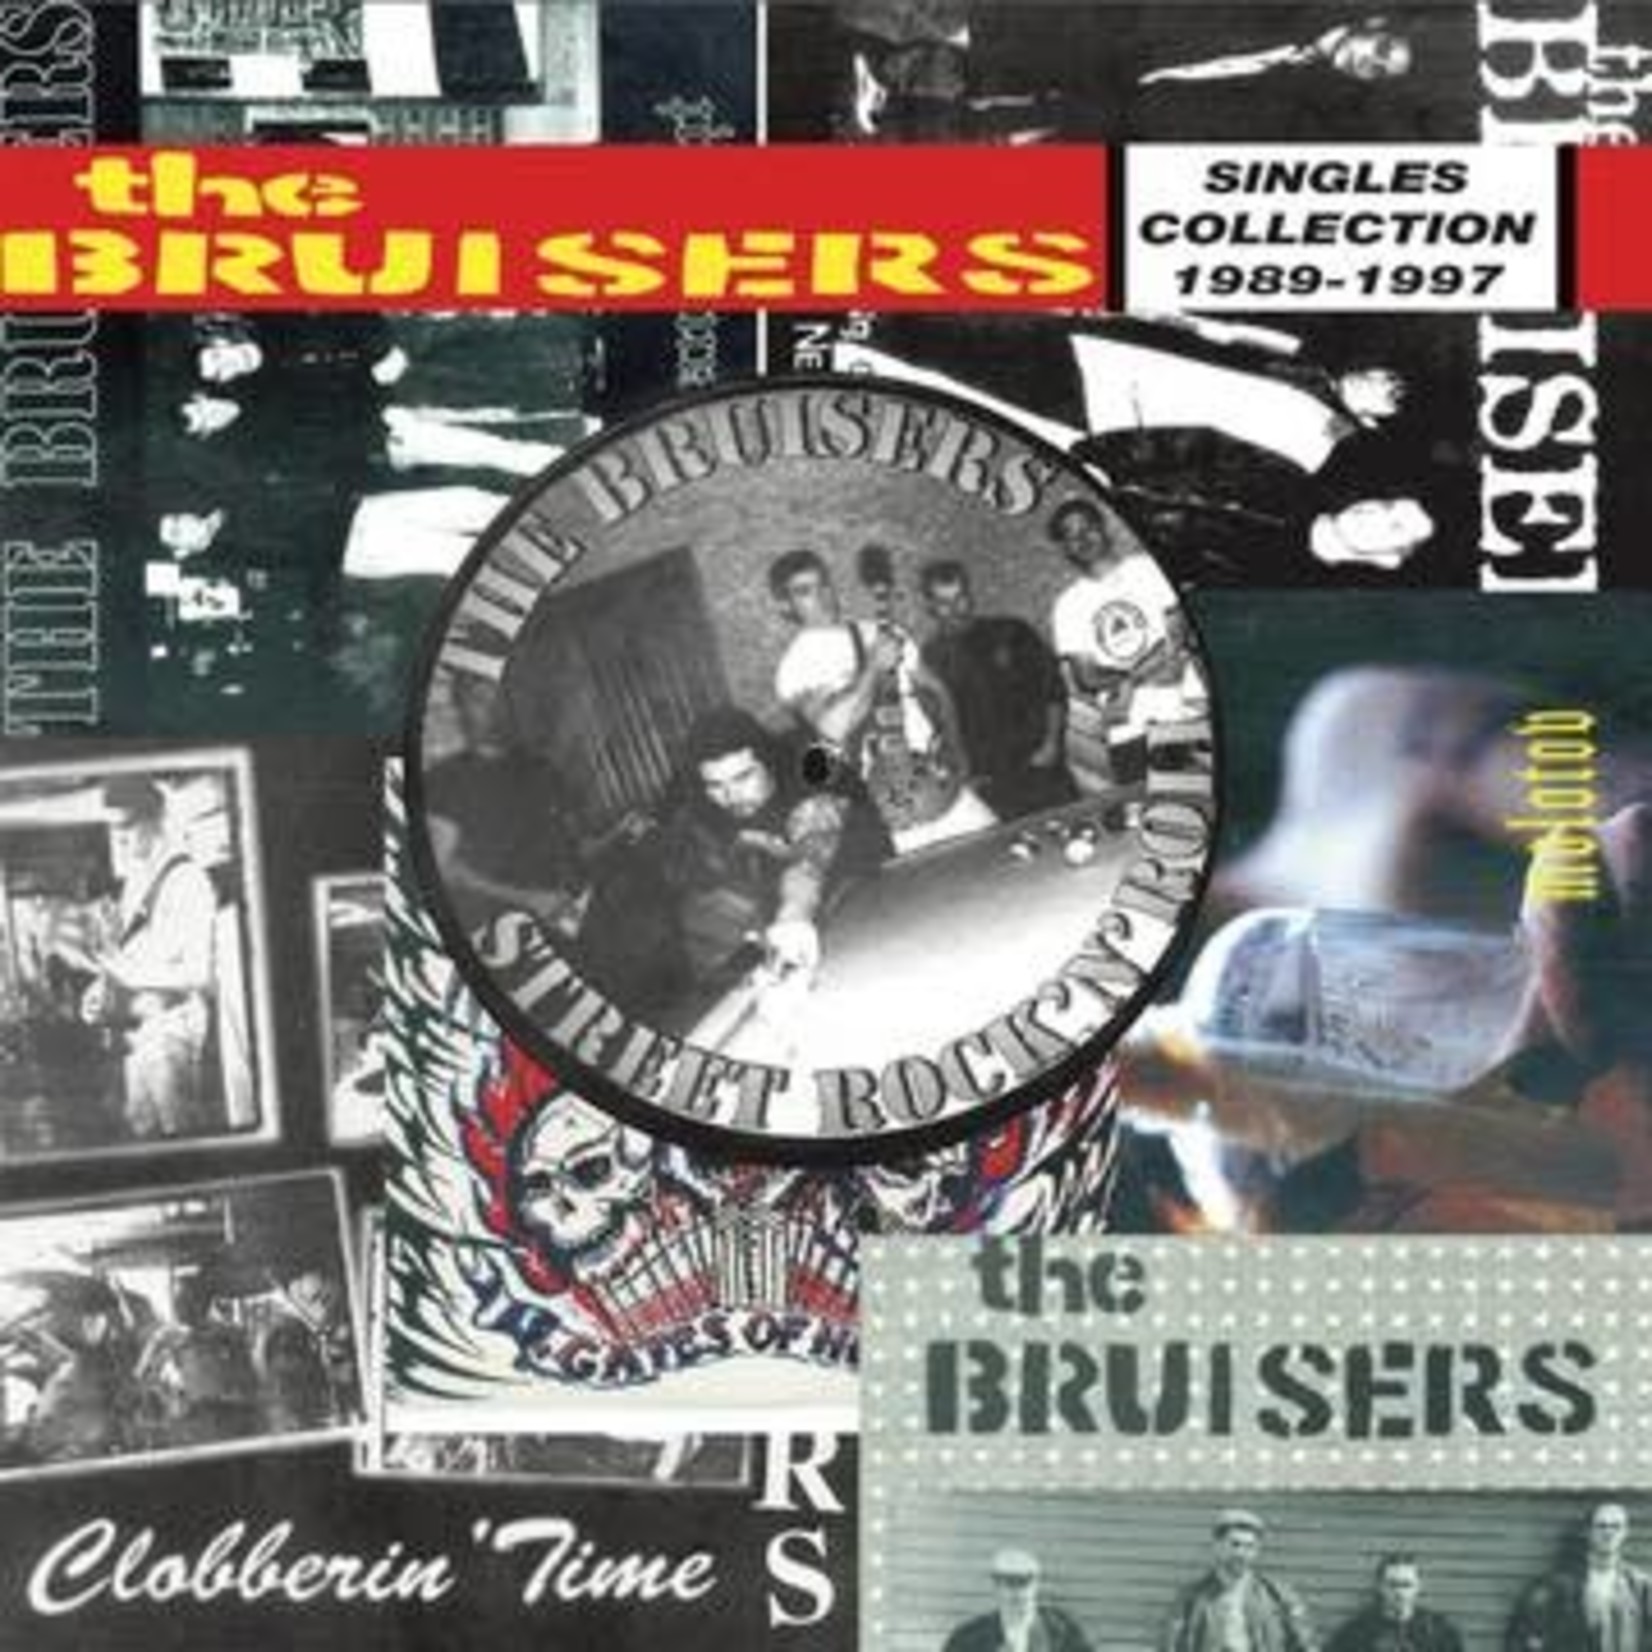 RSD Drops Bruisers - The Bruisers Singles Collection 1989-1997 (2LP)